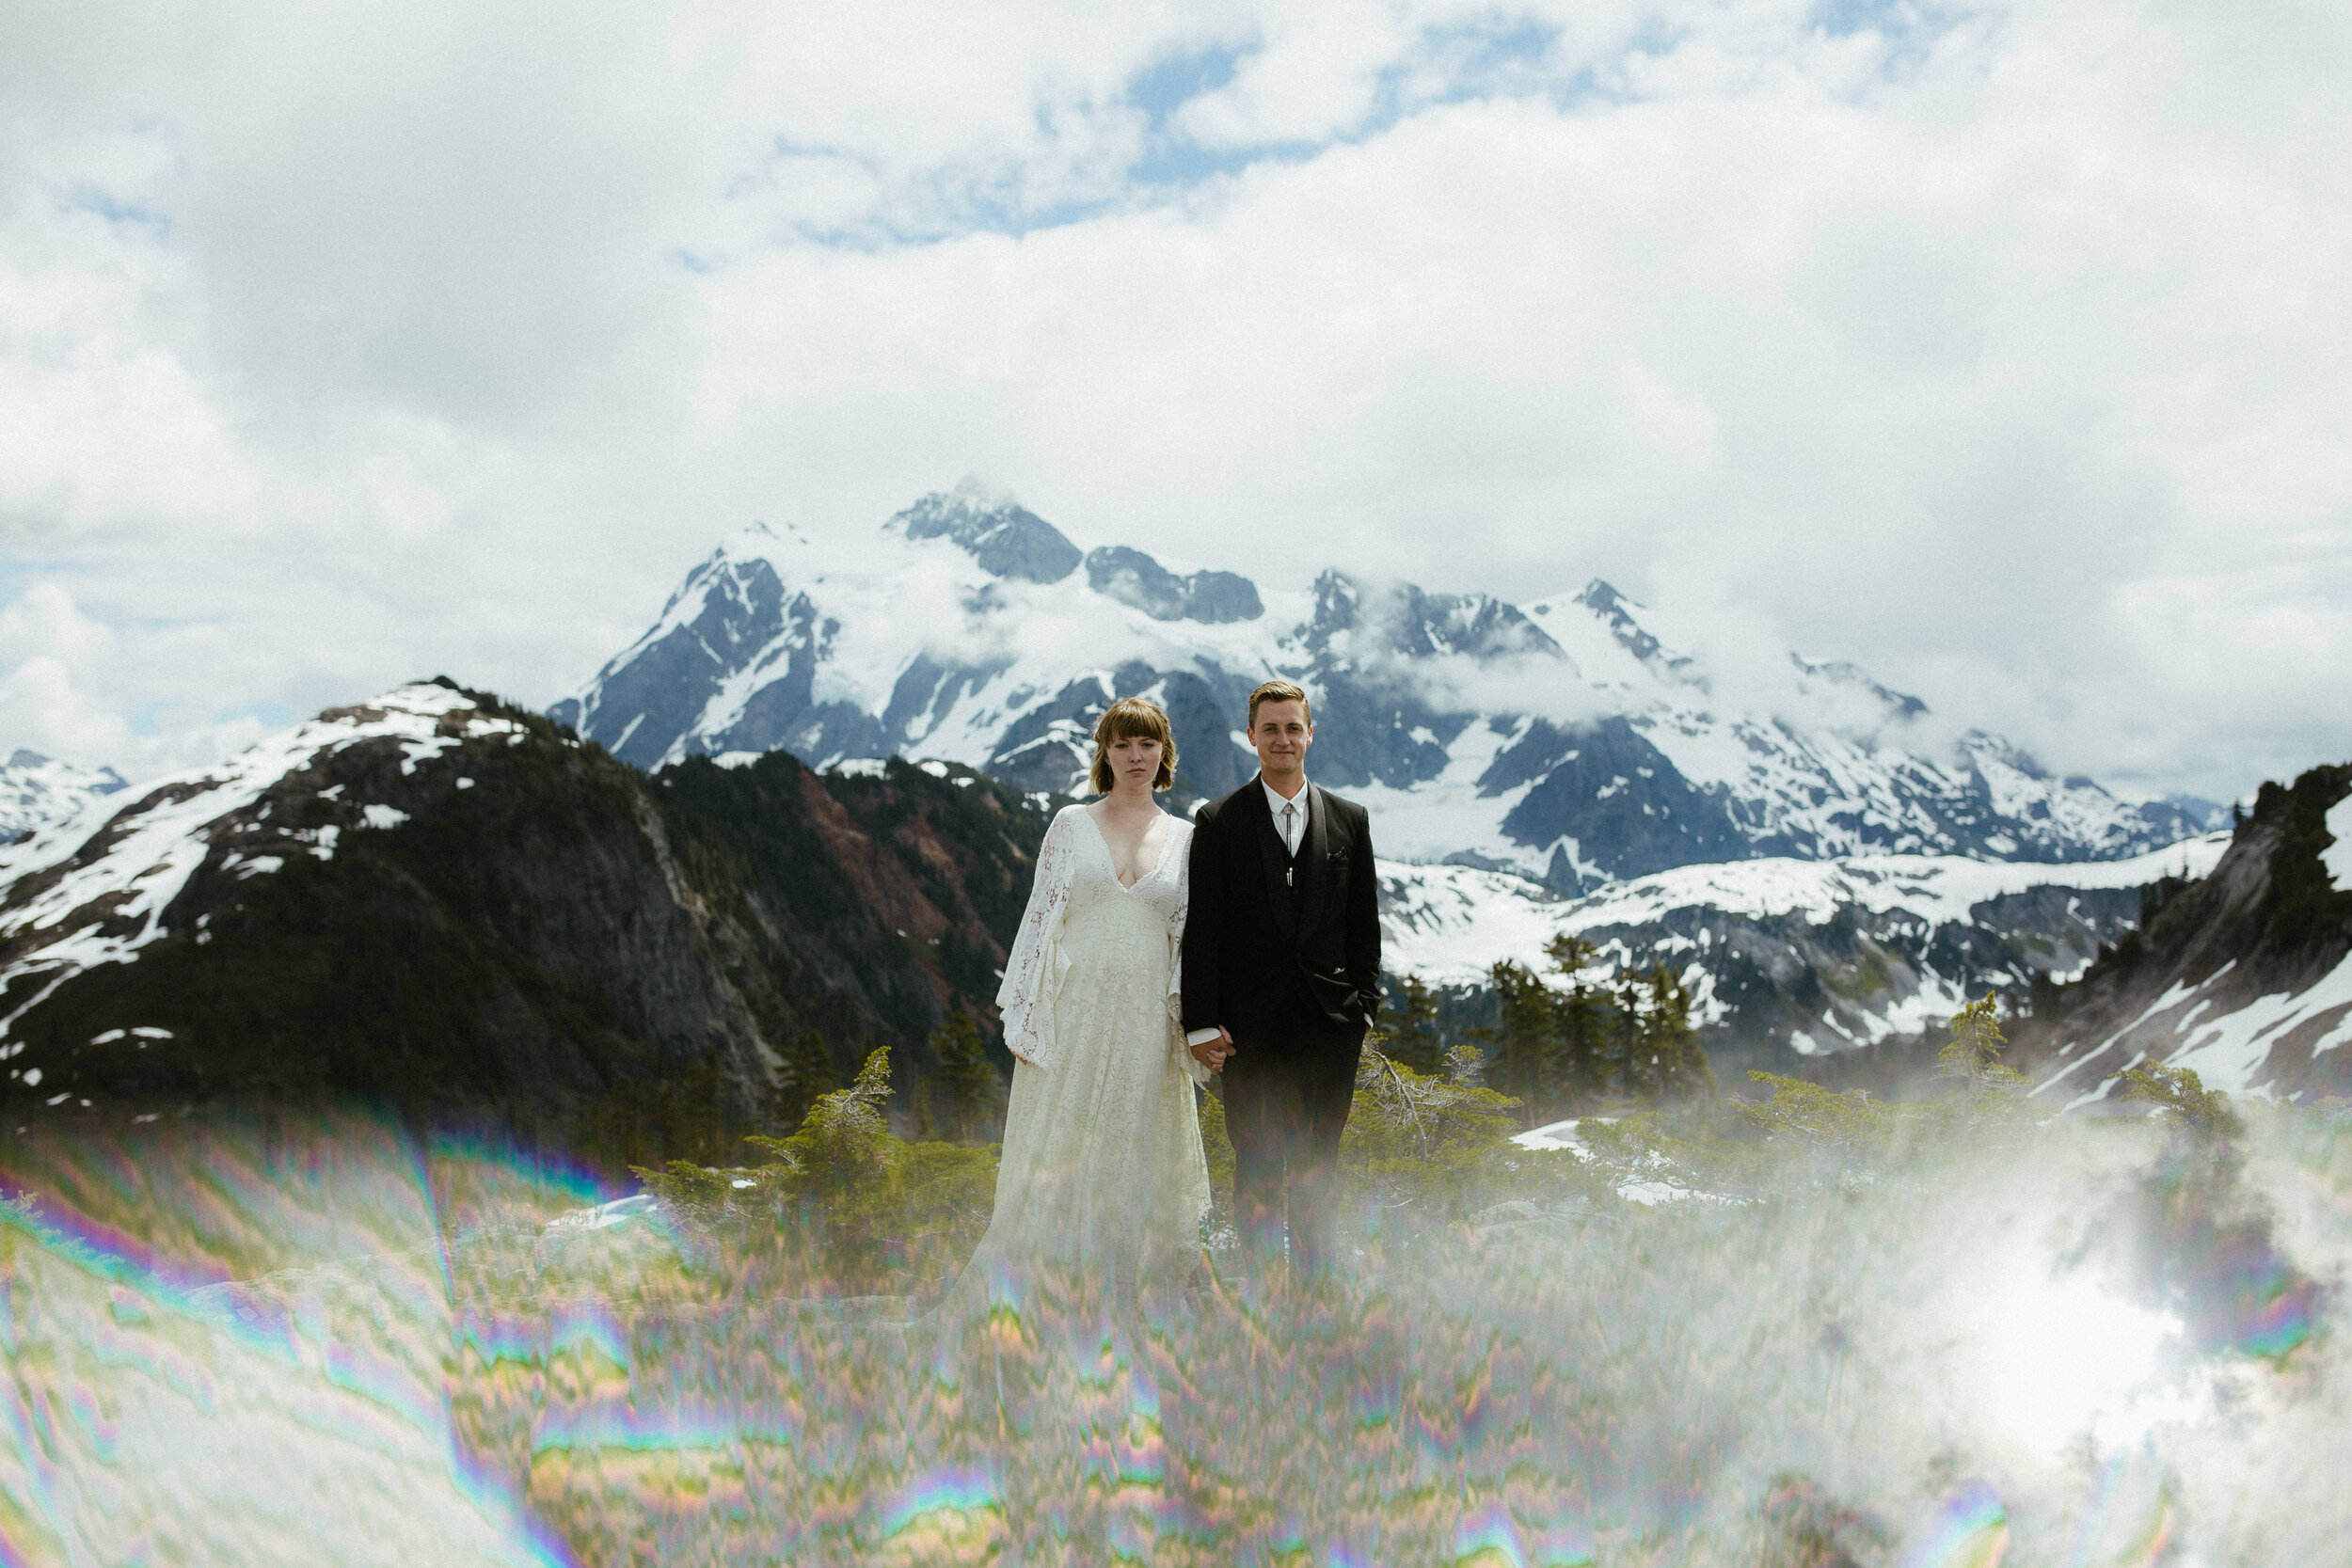 A bride and groom get married at Mt. Baker in a summer mountain elopement ceremony